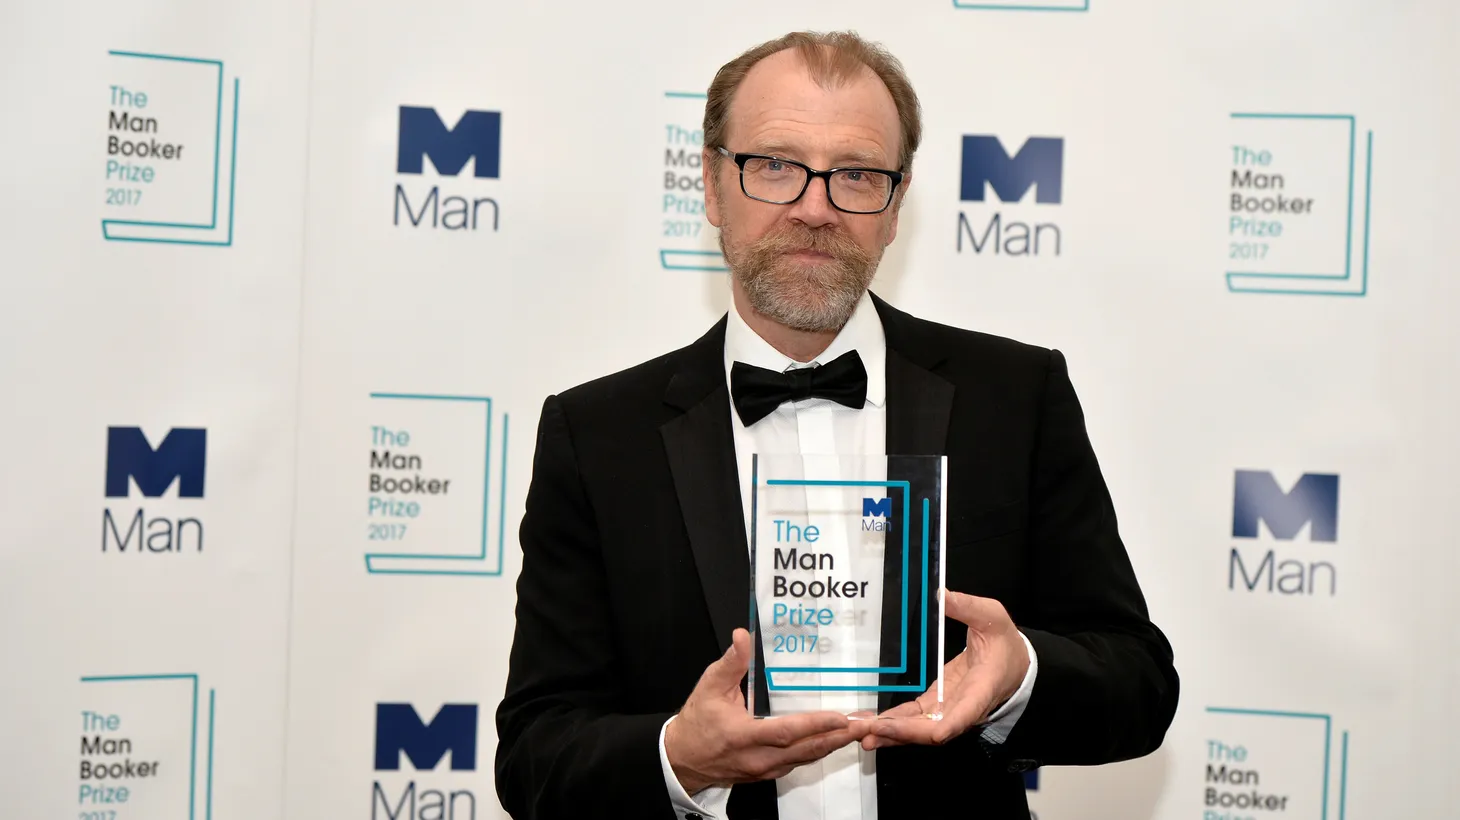 George Saunders, author of “Lincoln in the Bardo,” poses for photographers after winning the Man Booker Prize for Fiction 2017 in London, Britain, October 17, 2017.